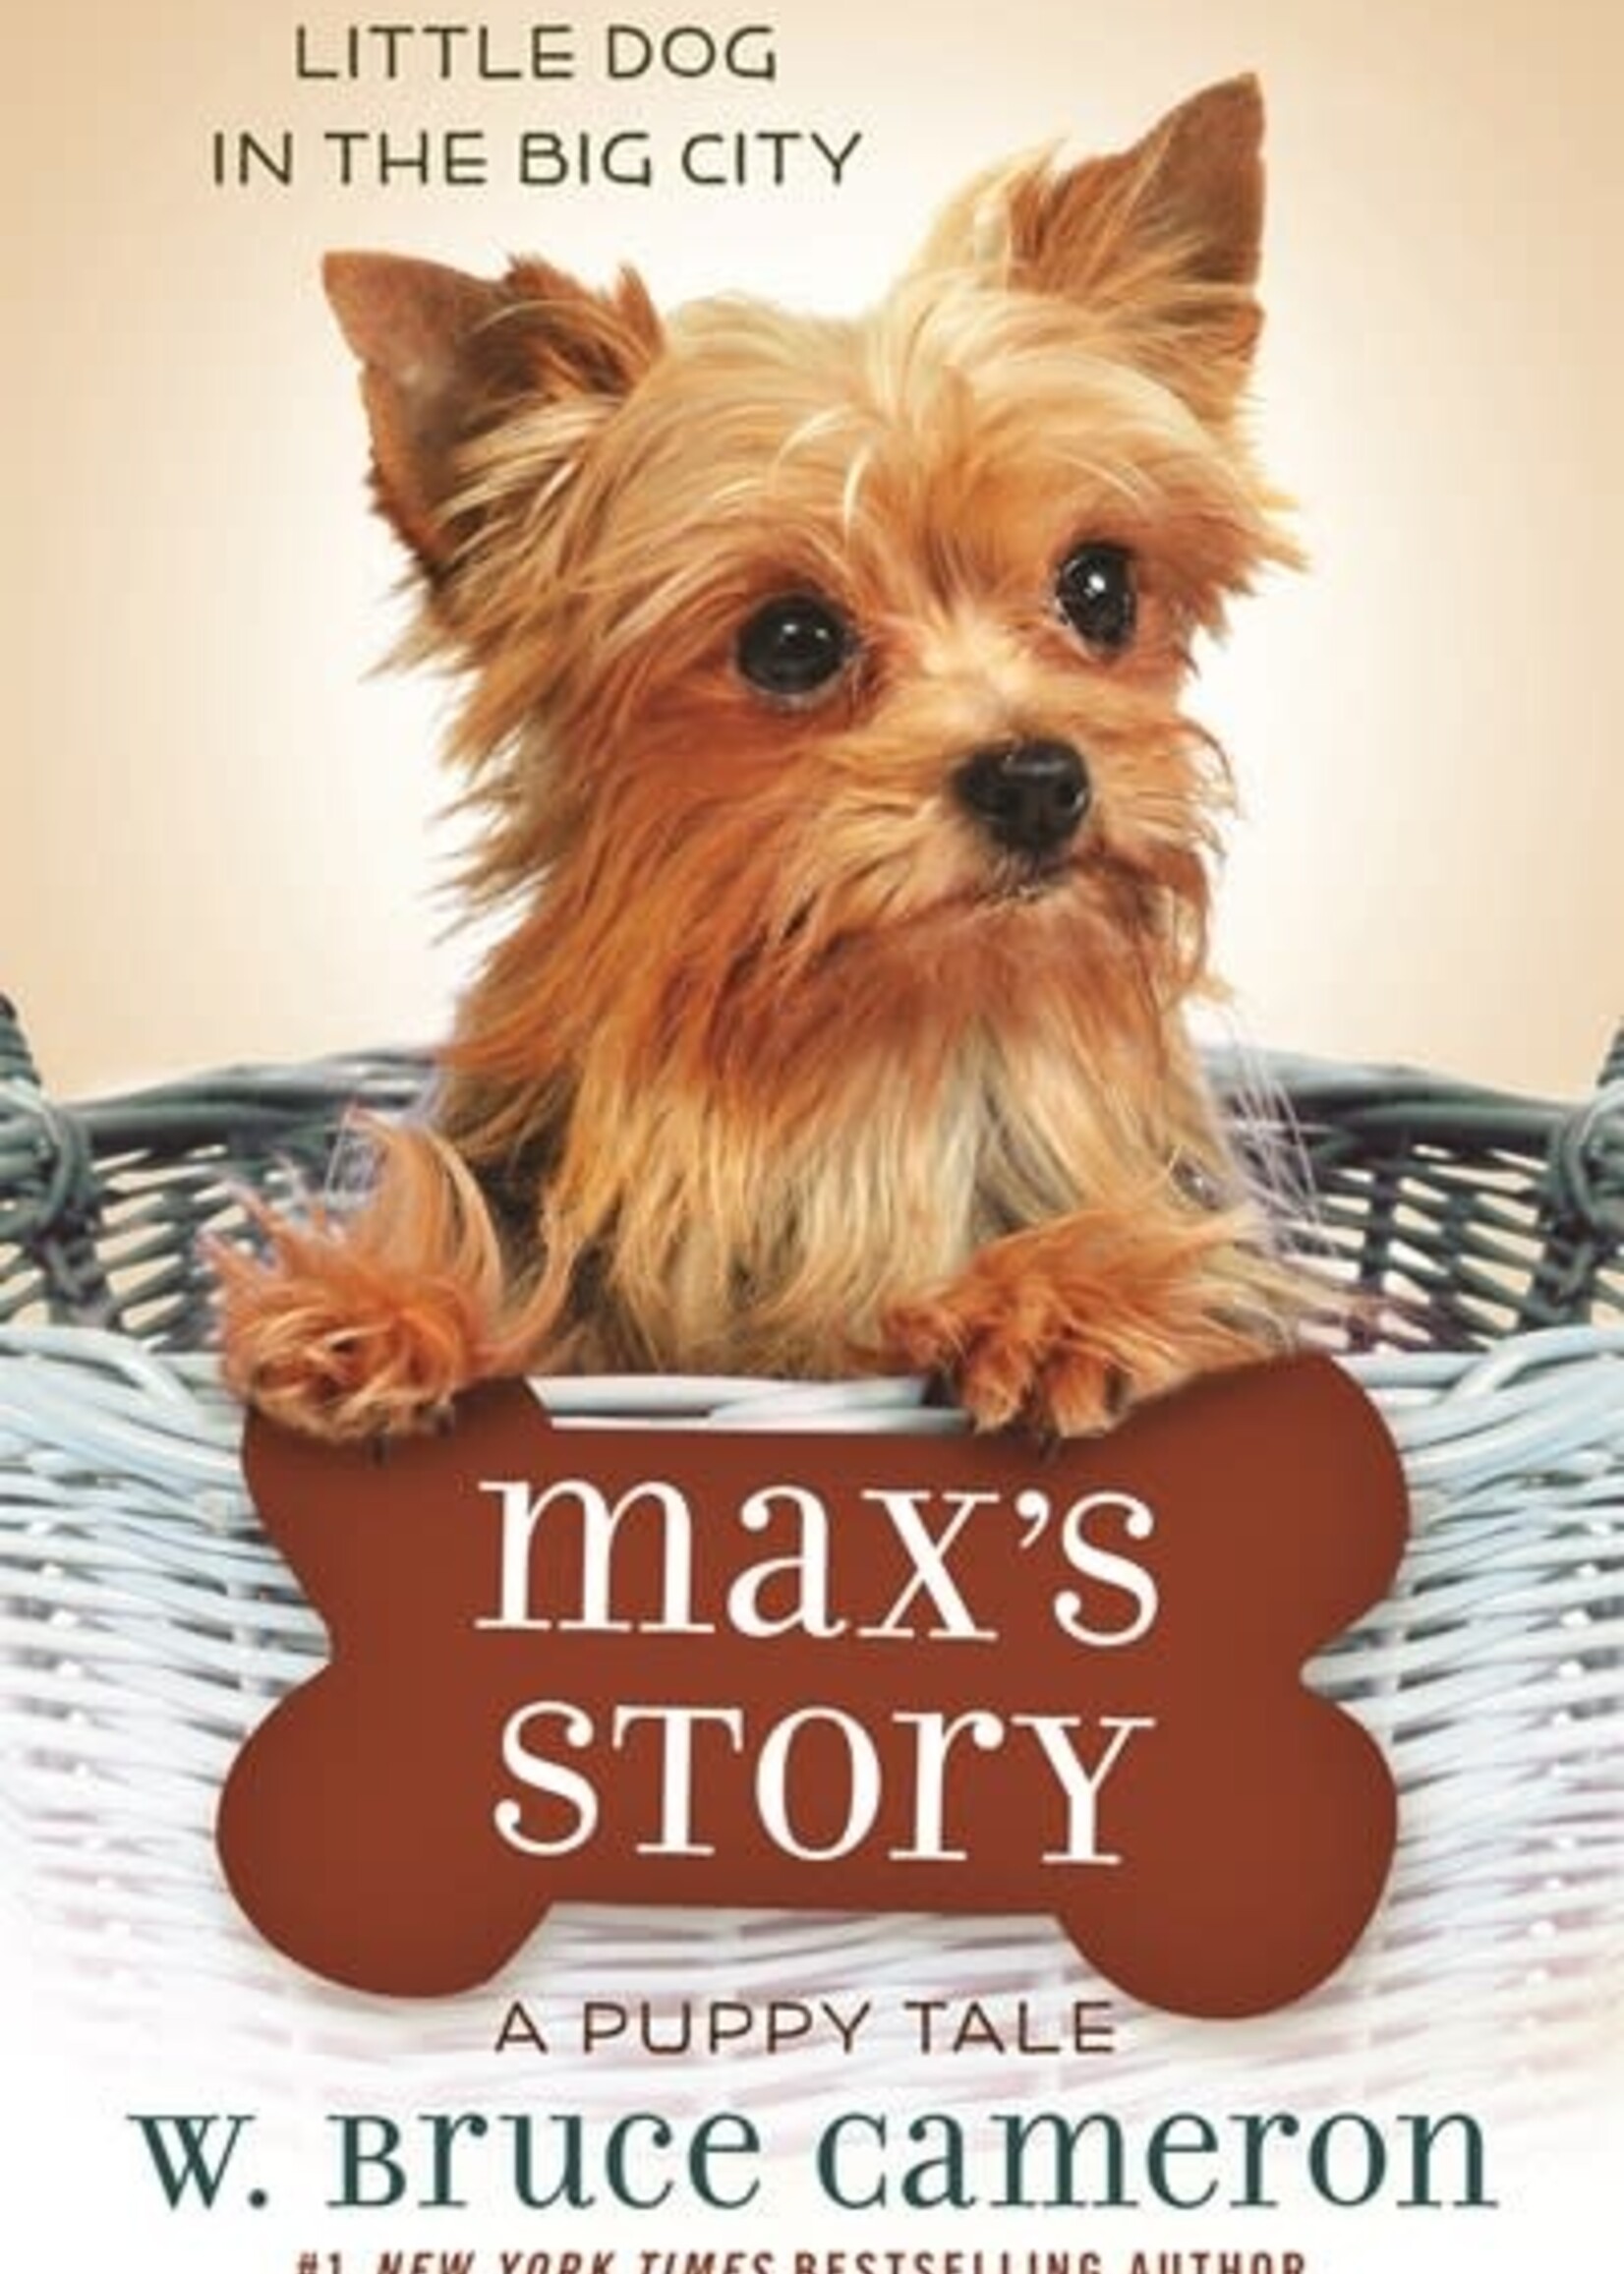 Puppy Tale 4 Max's Story